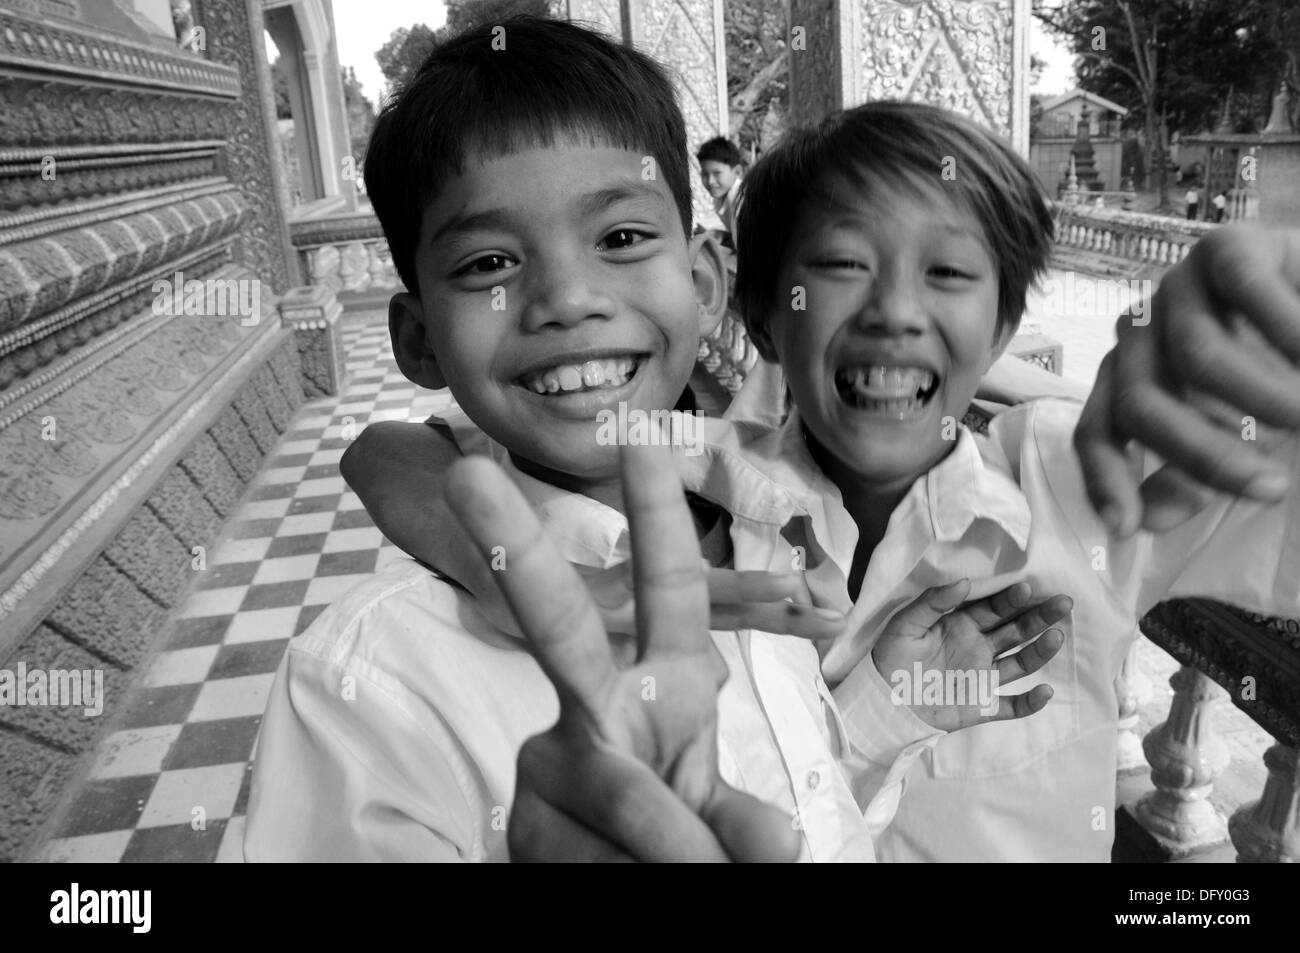 Young asian boys Black and White Stock Photos & Images - Alamy